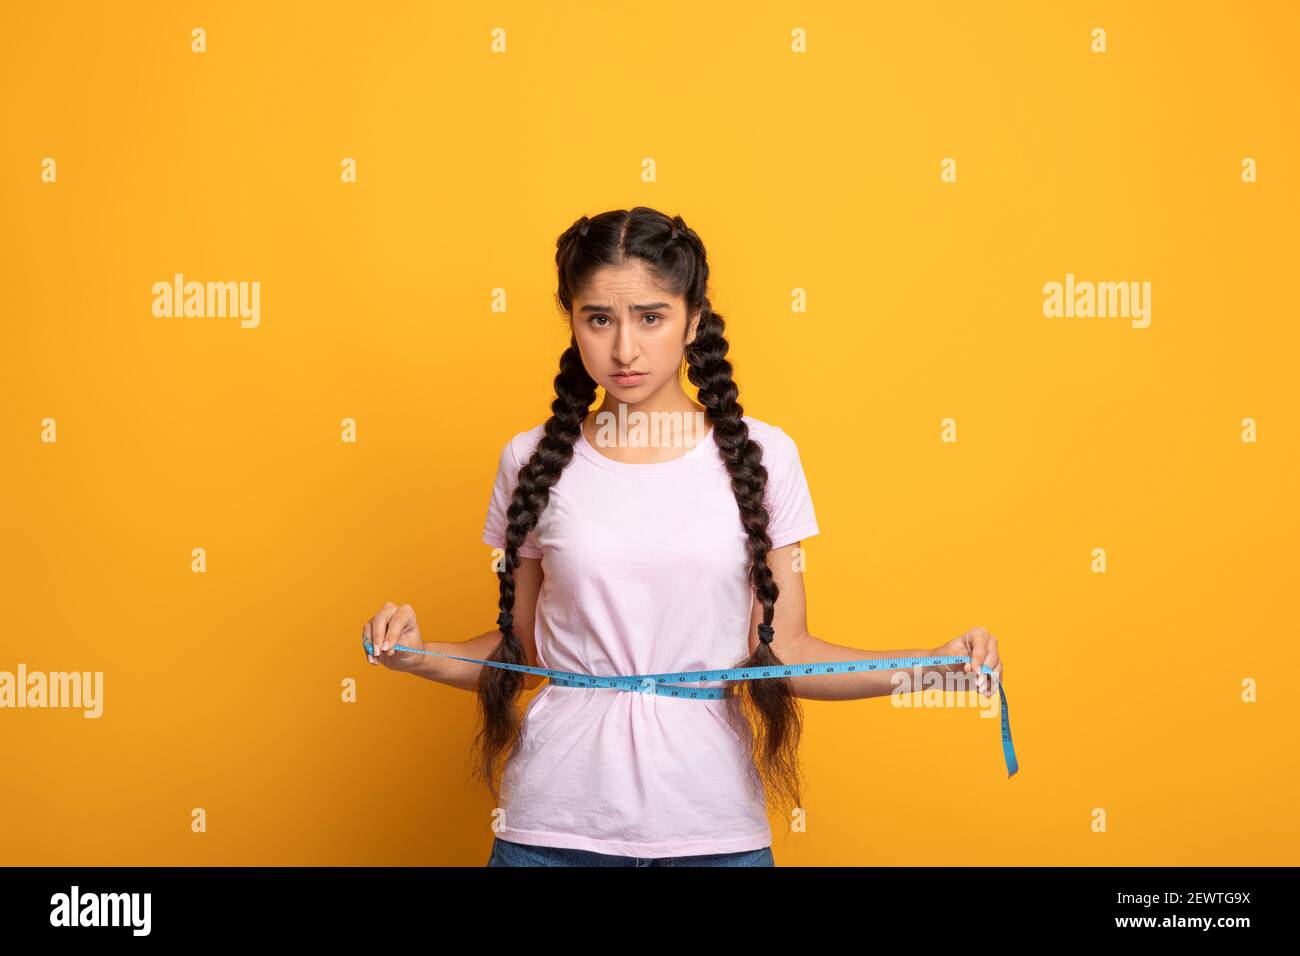 Sad Indian Woman Measuring Waist With Tape. Slimming Concept Stock Photo